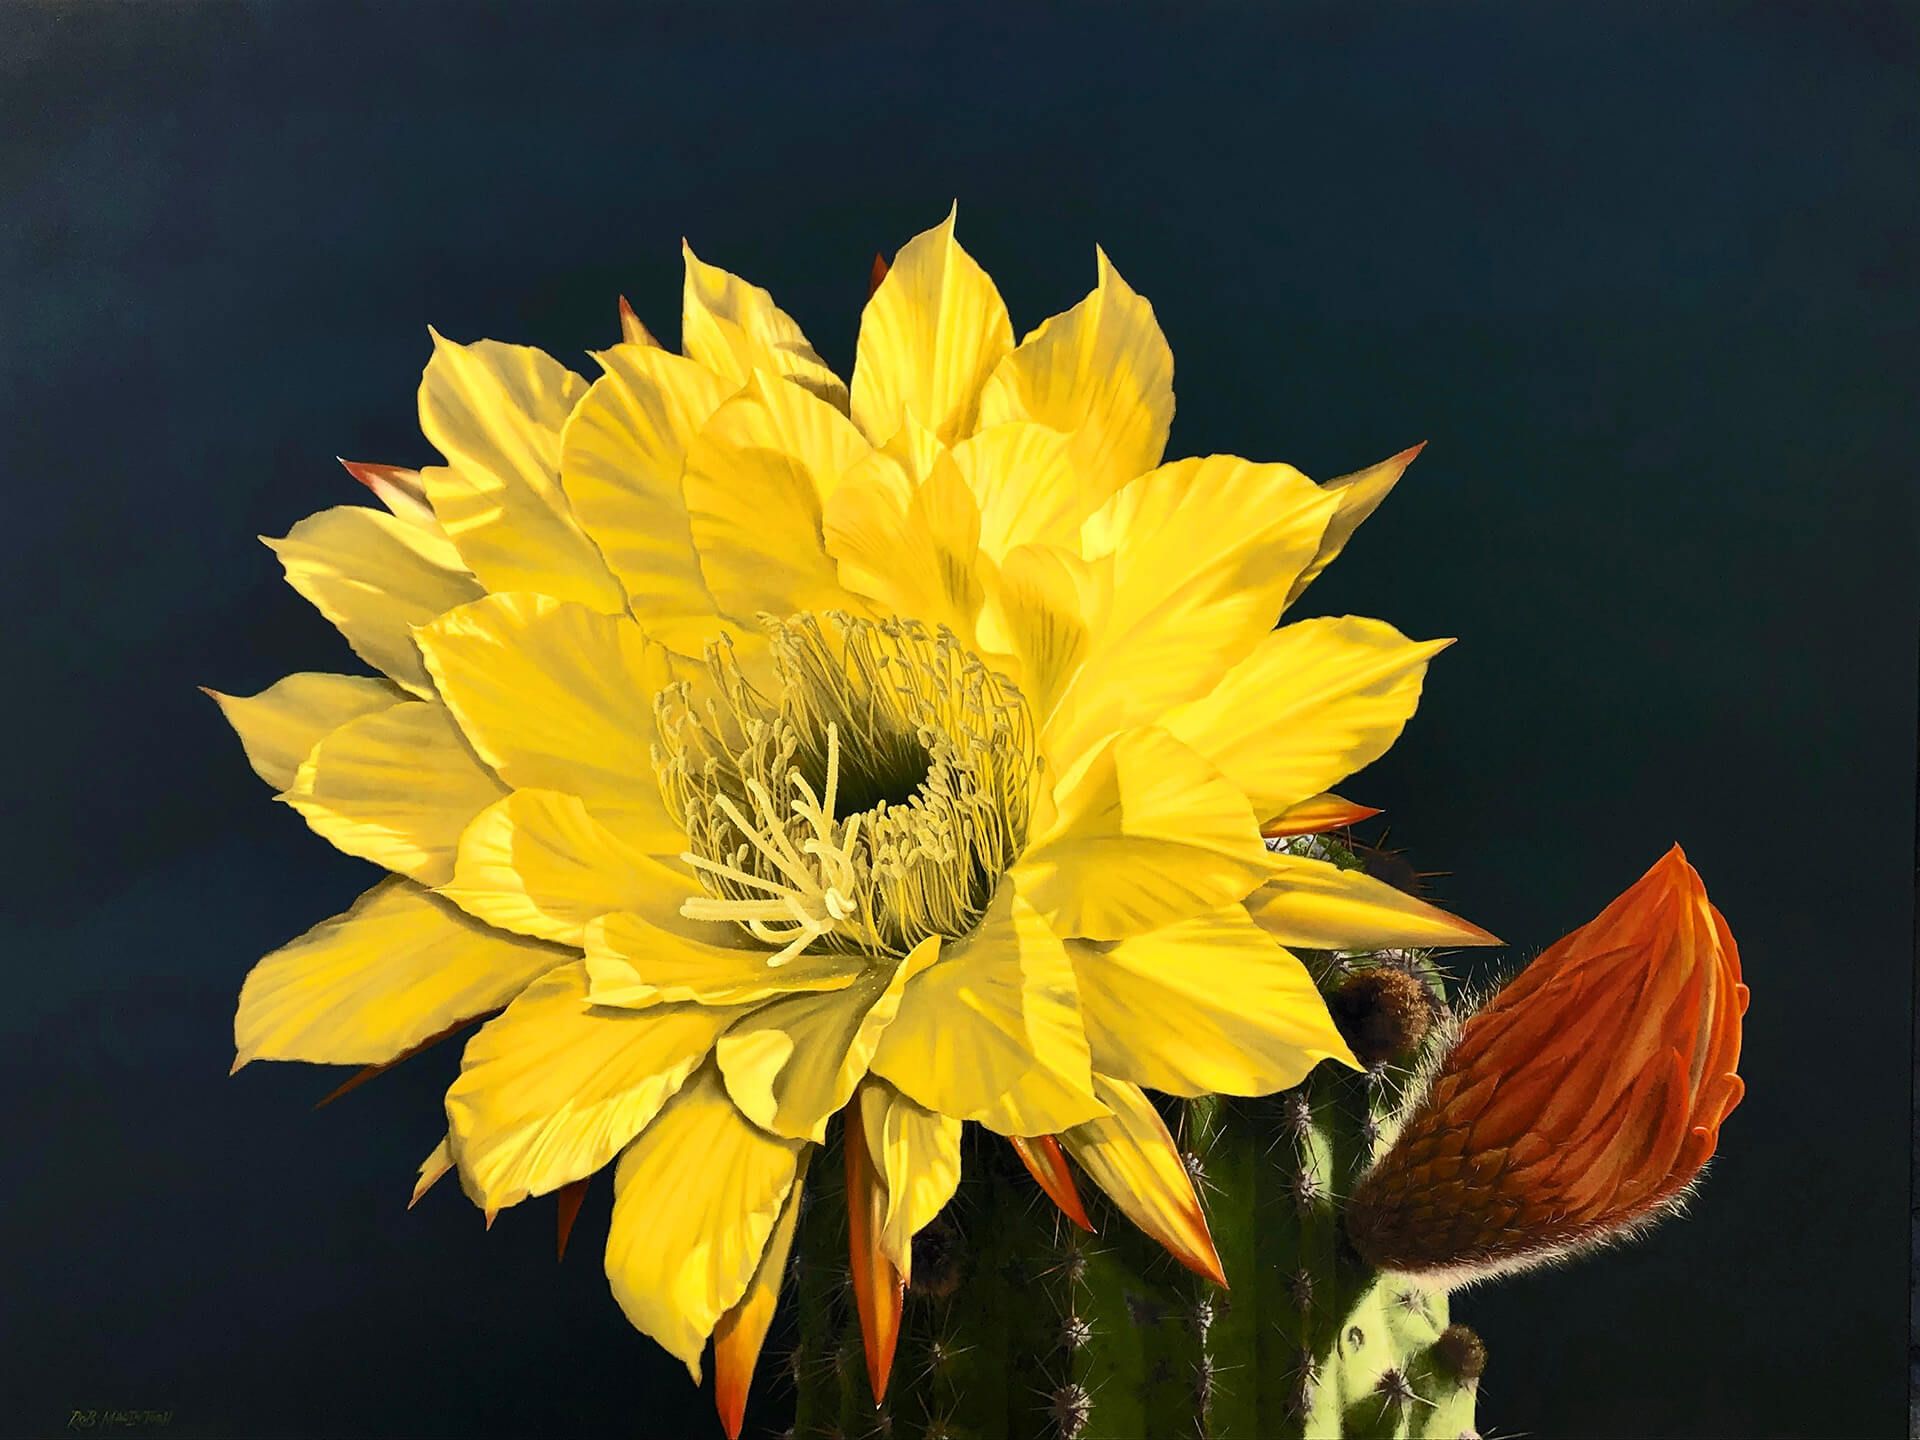 Photorealistic painting of a yellow bloom